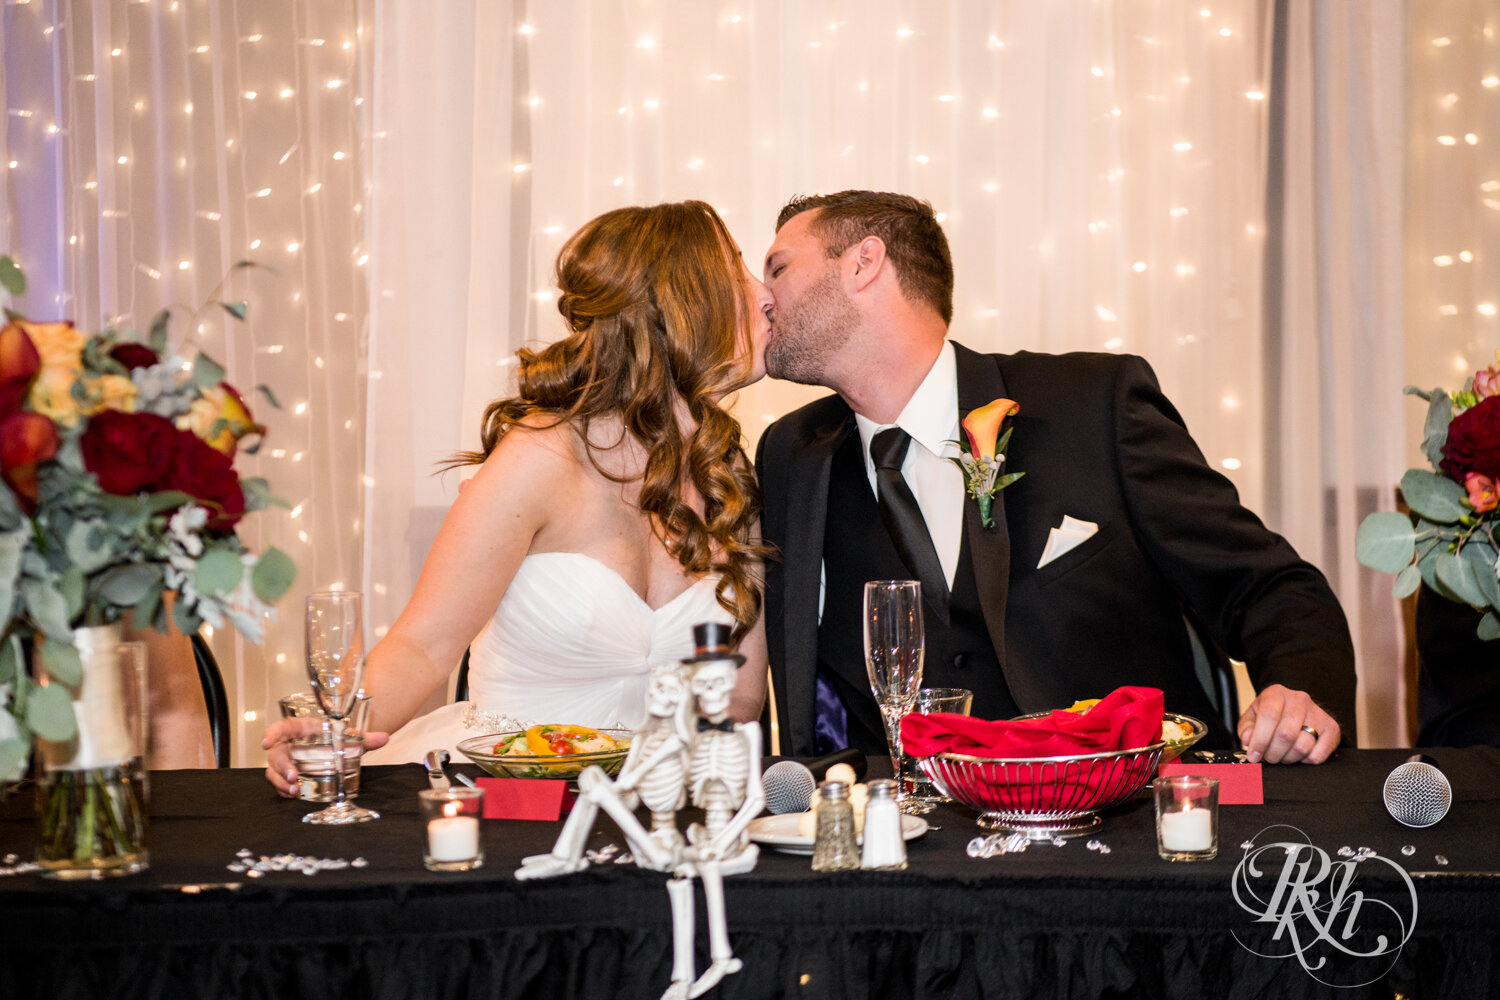 Bride and groom kiss during speeches at wedding reception at Rockwoods in Otsego, Minnesota.